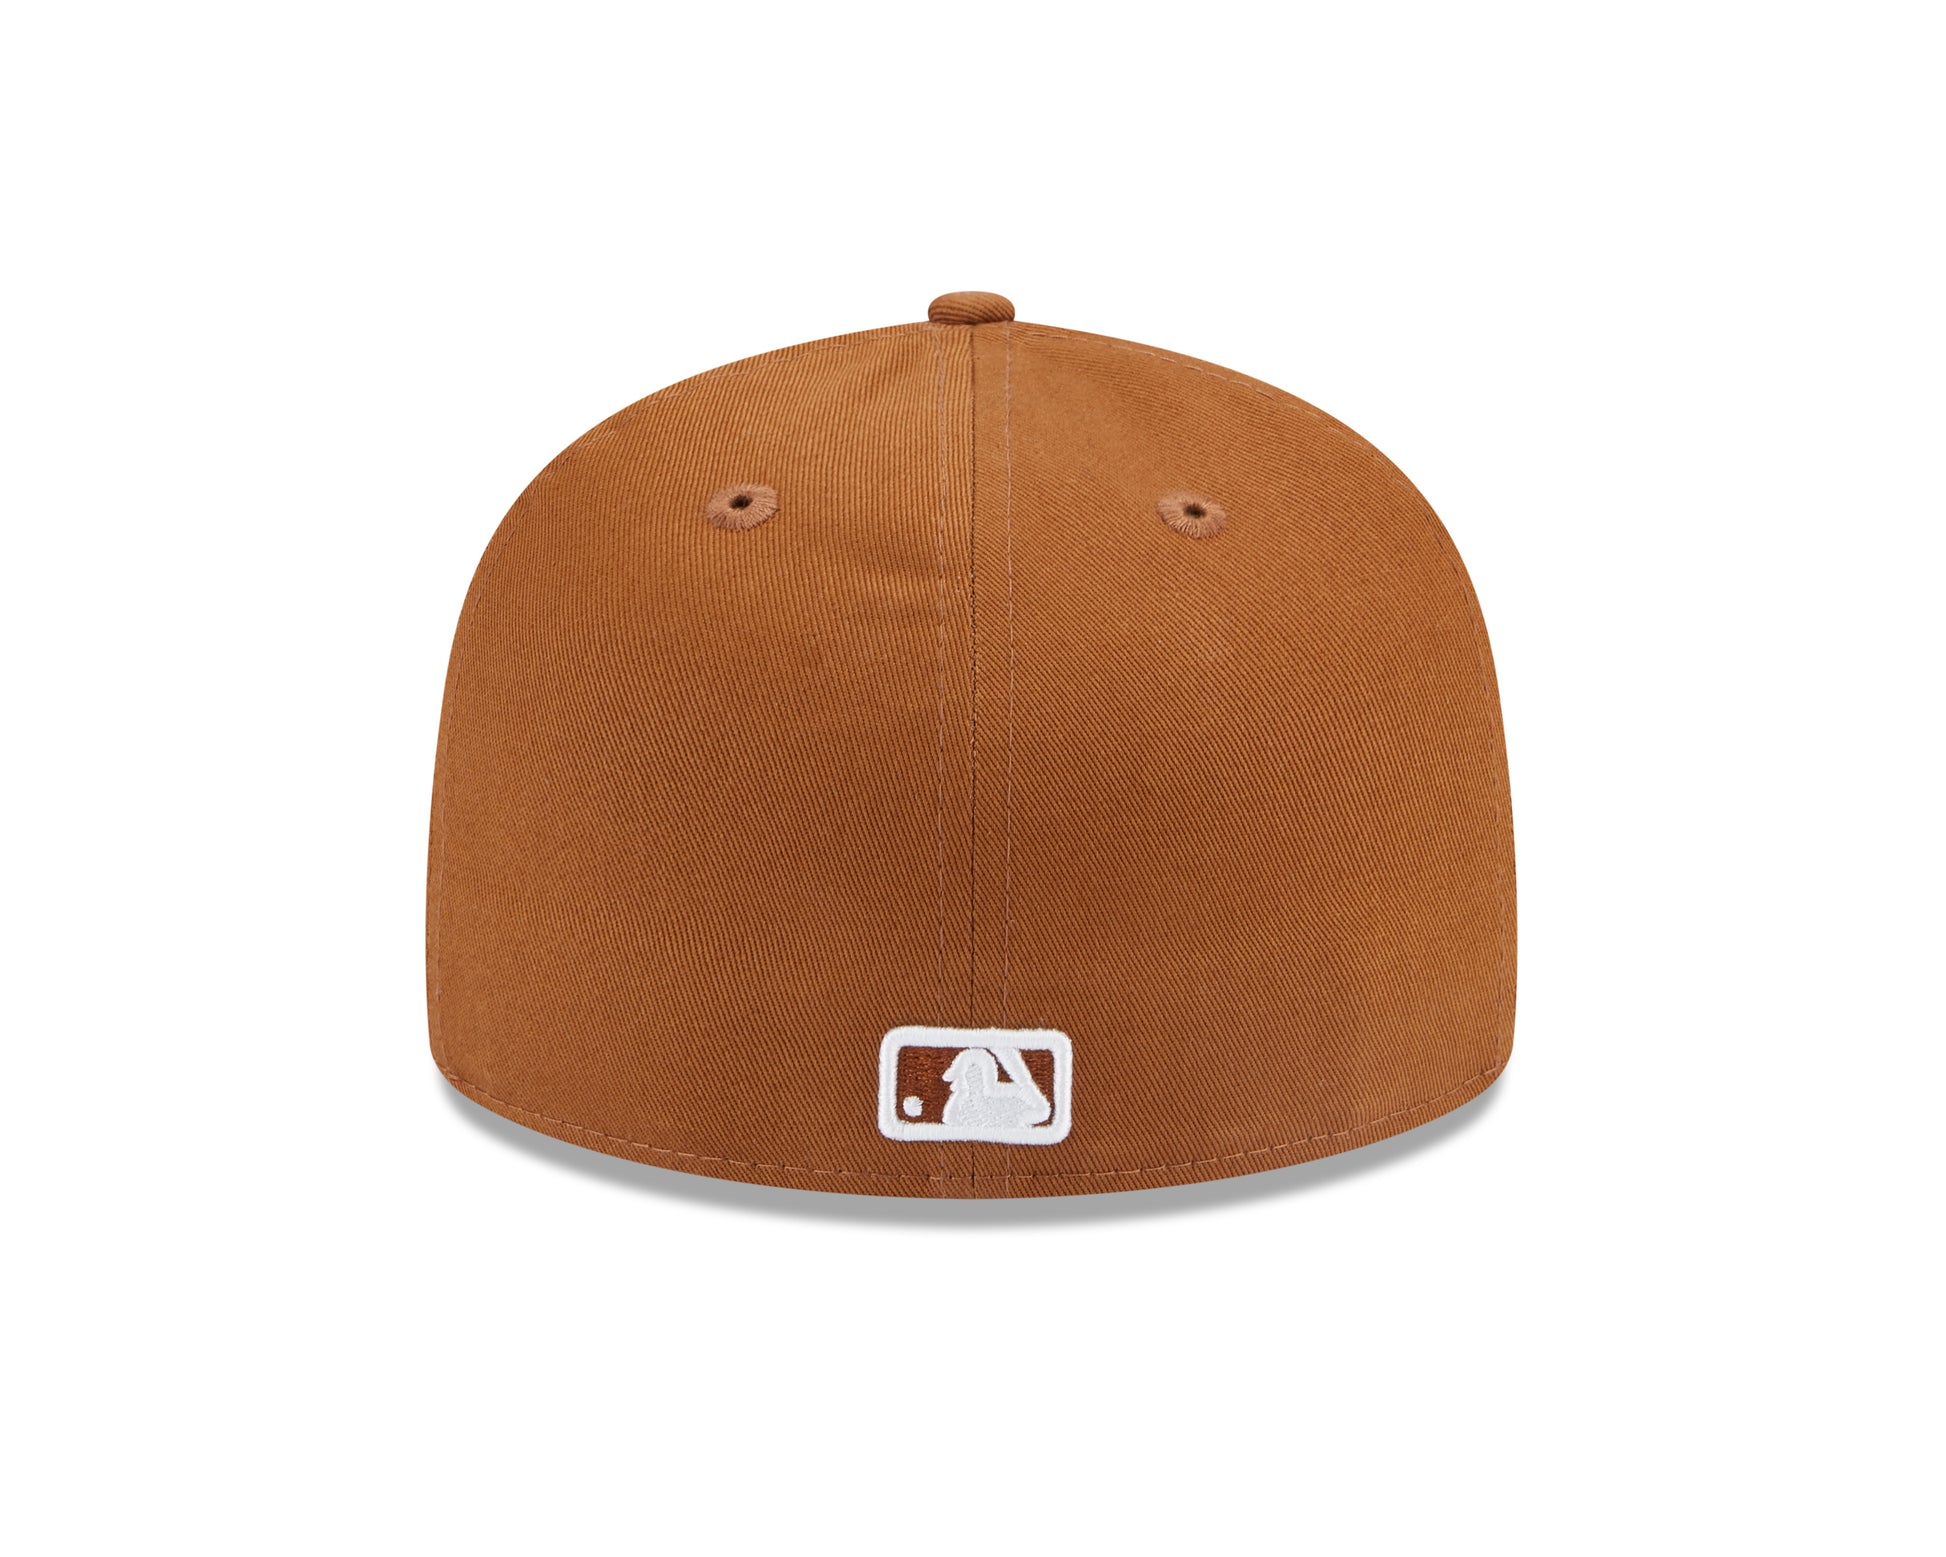 New Era - 59Fifty Fitted Cap TEAM OUTLINE Los Angeles Dodgers - Light Brown - Headz Up 